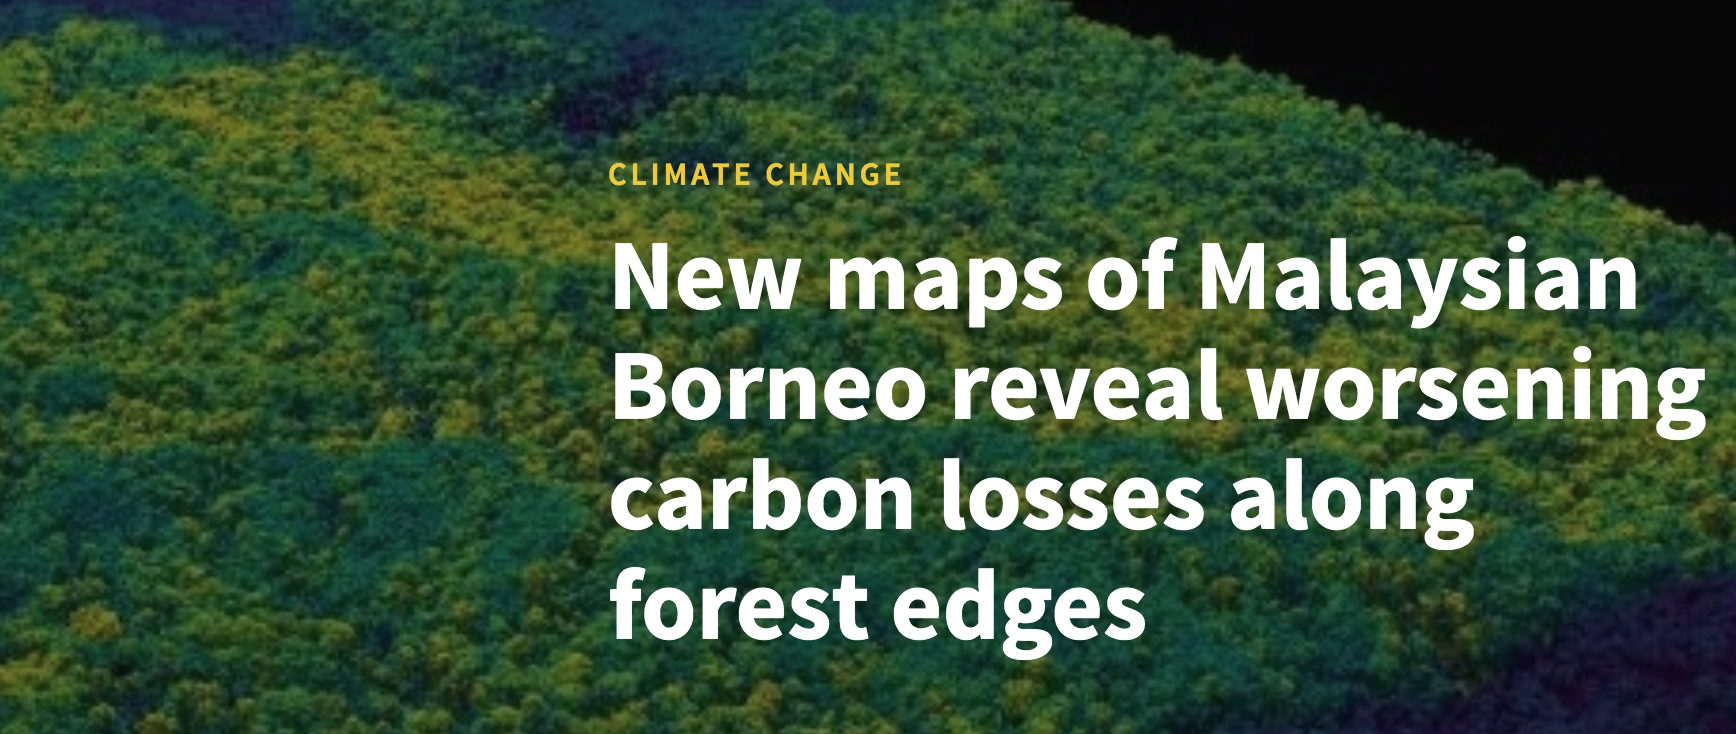 New maps of Malaysian Borneo reveal worsening carbon losses along forest edges